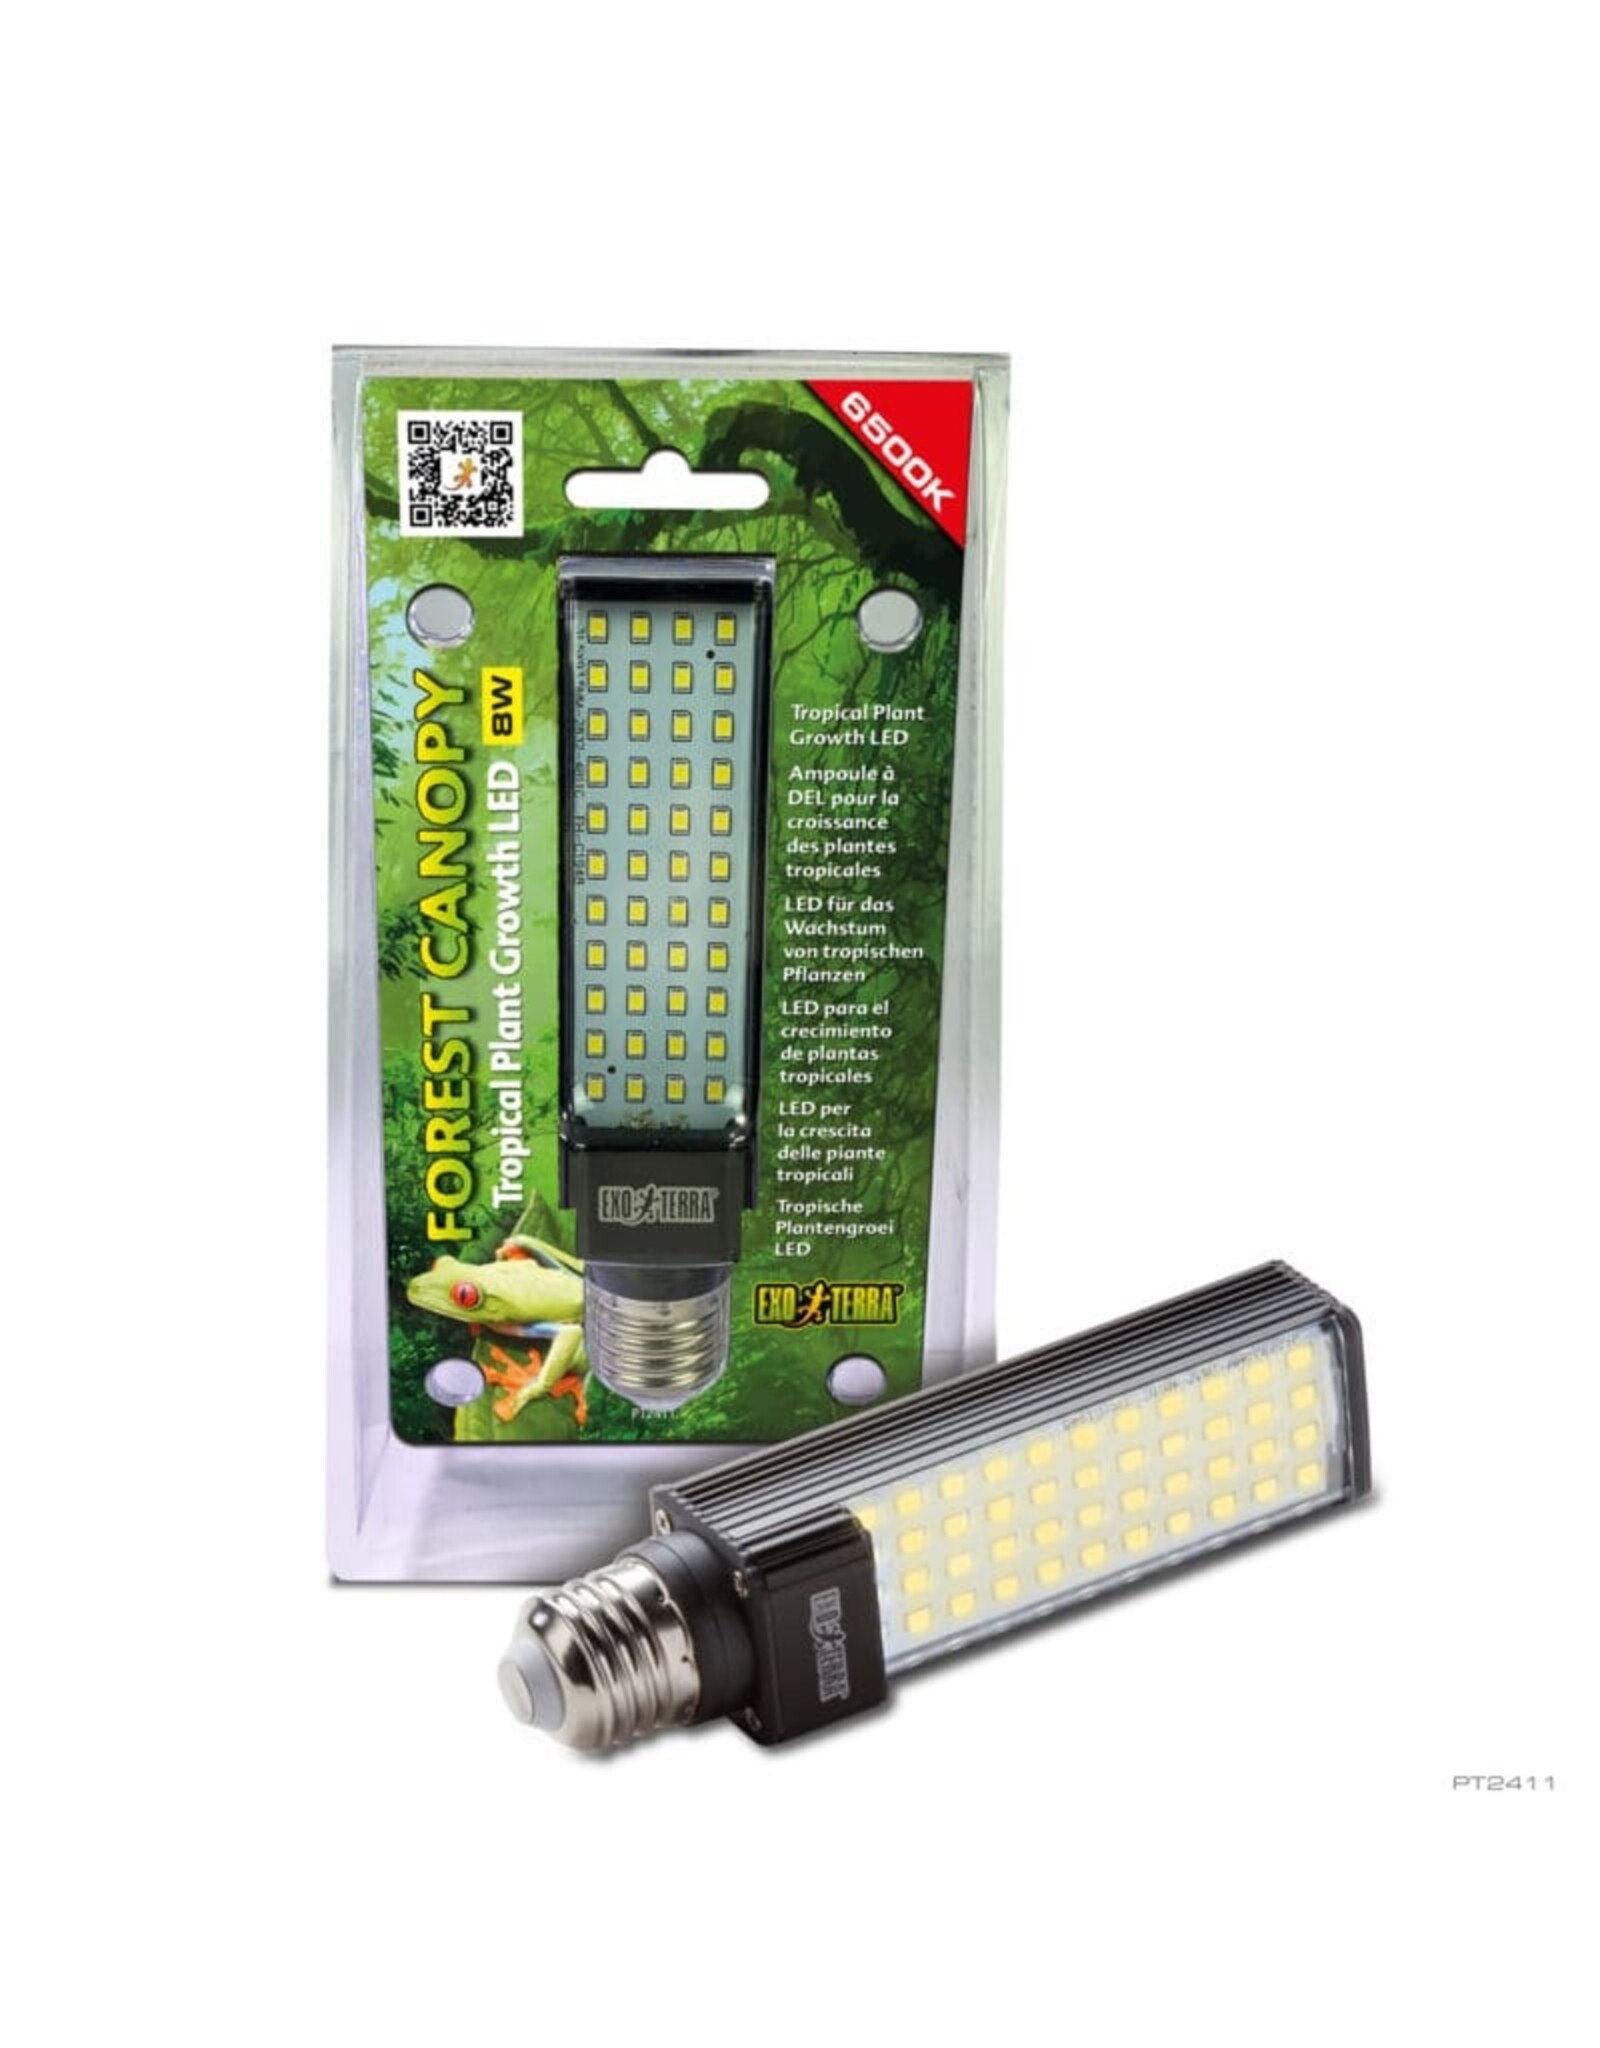 Exo Terra Forest Canopy LED